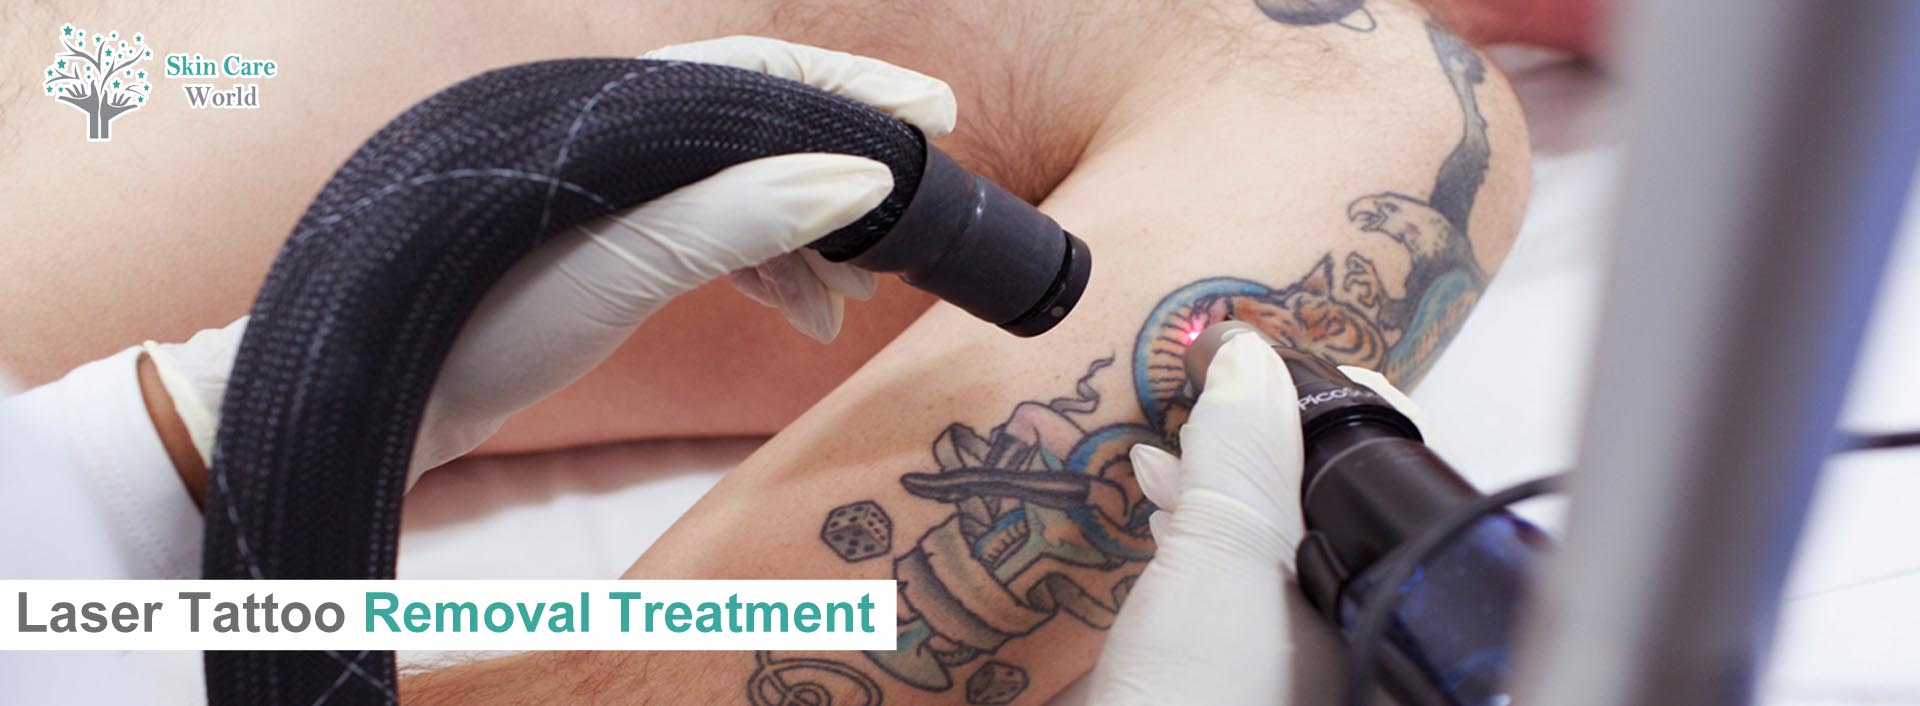 Permamant Laser Tattoo Removal Treatment Clinic in Gurgaon Near me at  Affordable Cost With Best Doctor